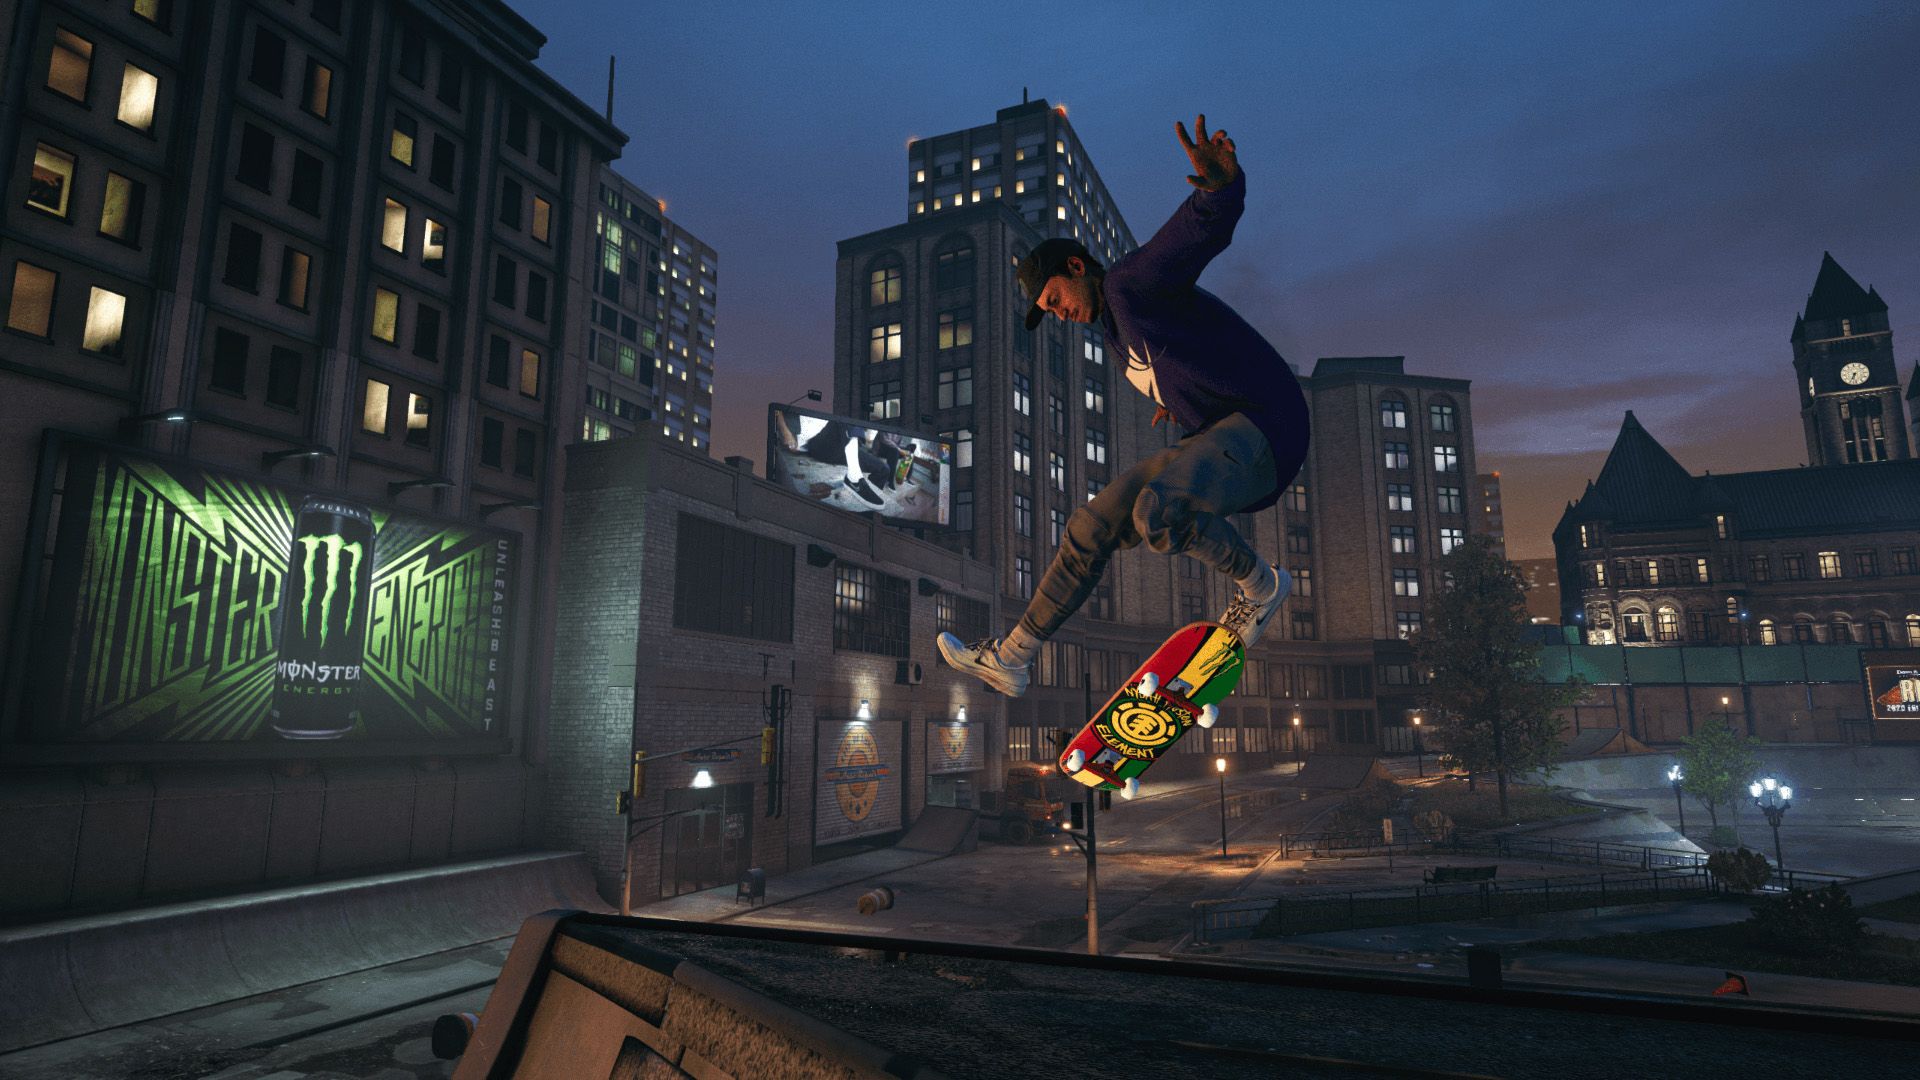 Tony Hawk's Pro Skater 1 + 2 initial review: Hang time with the remastered collection photo 3